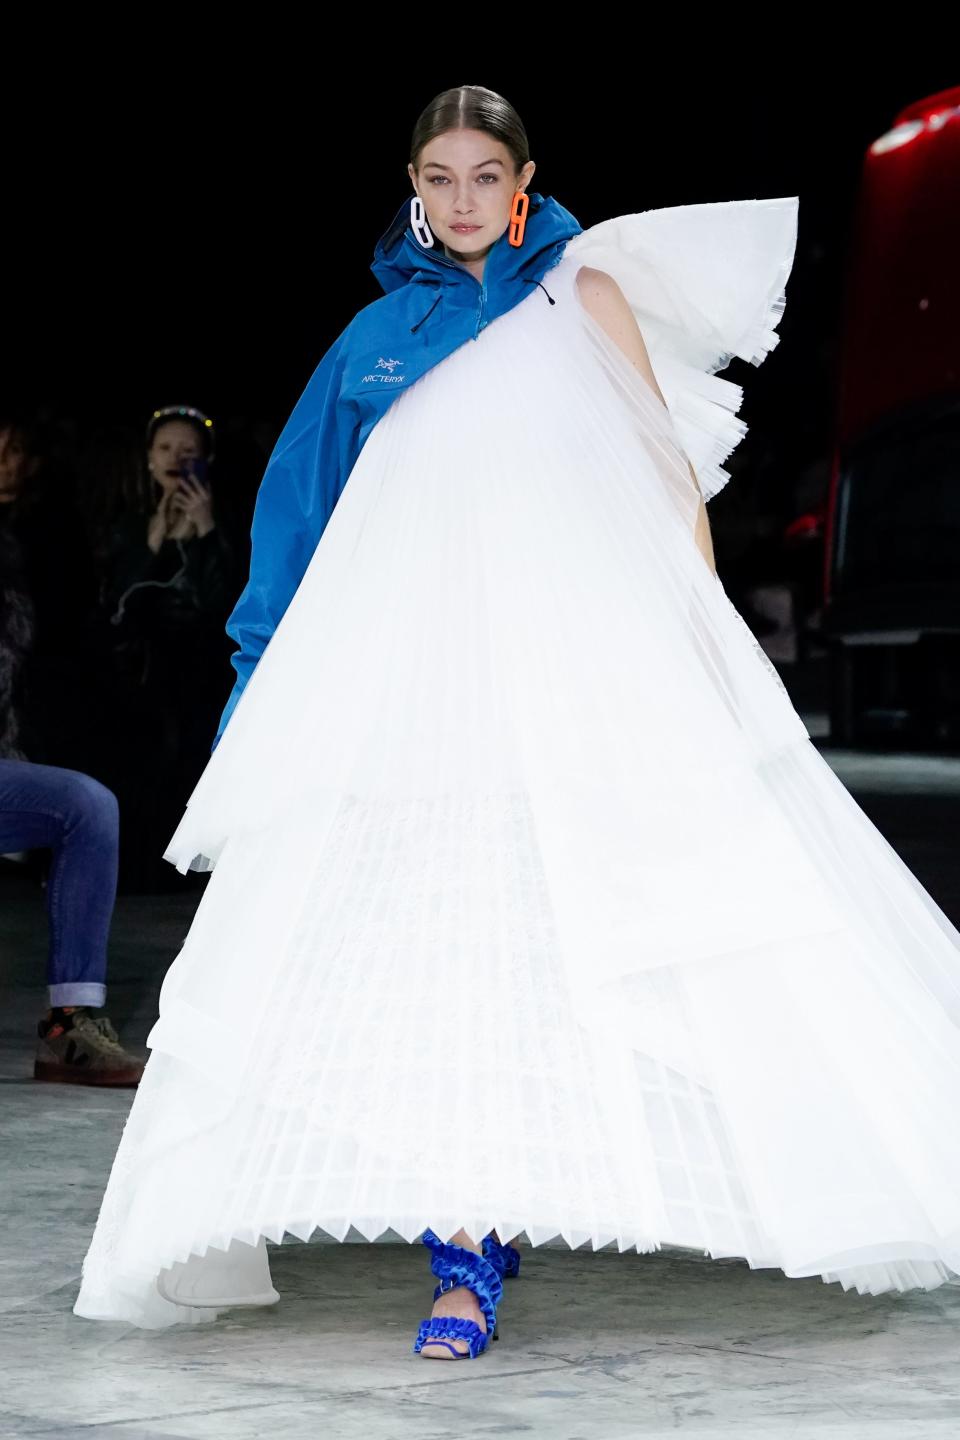 Gigi Hadid walking the runway in a tufted tulle gown.